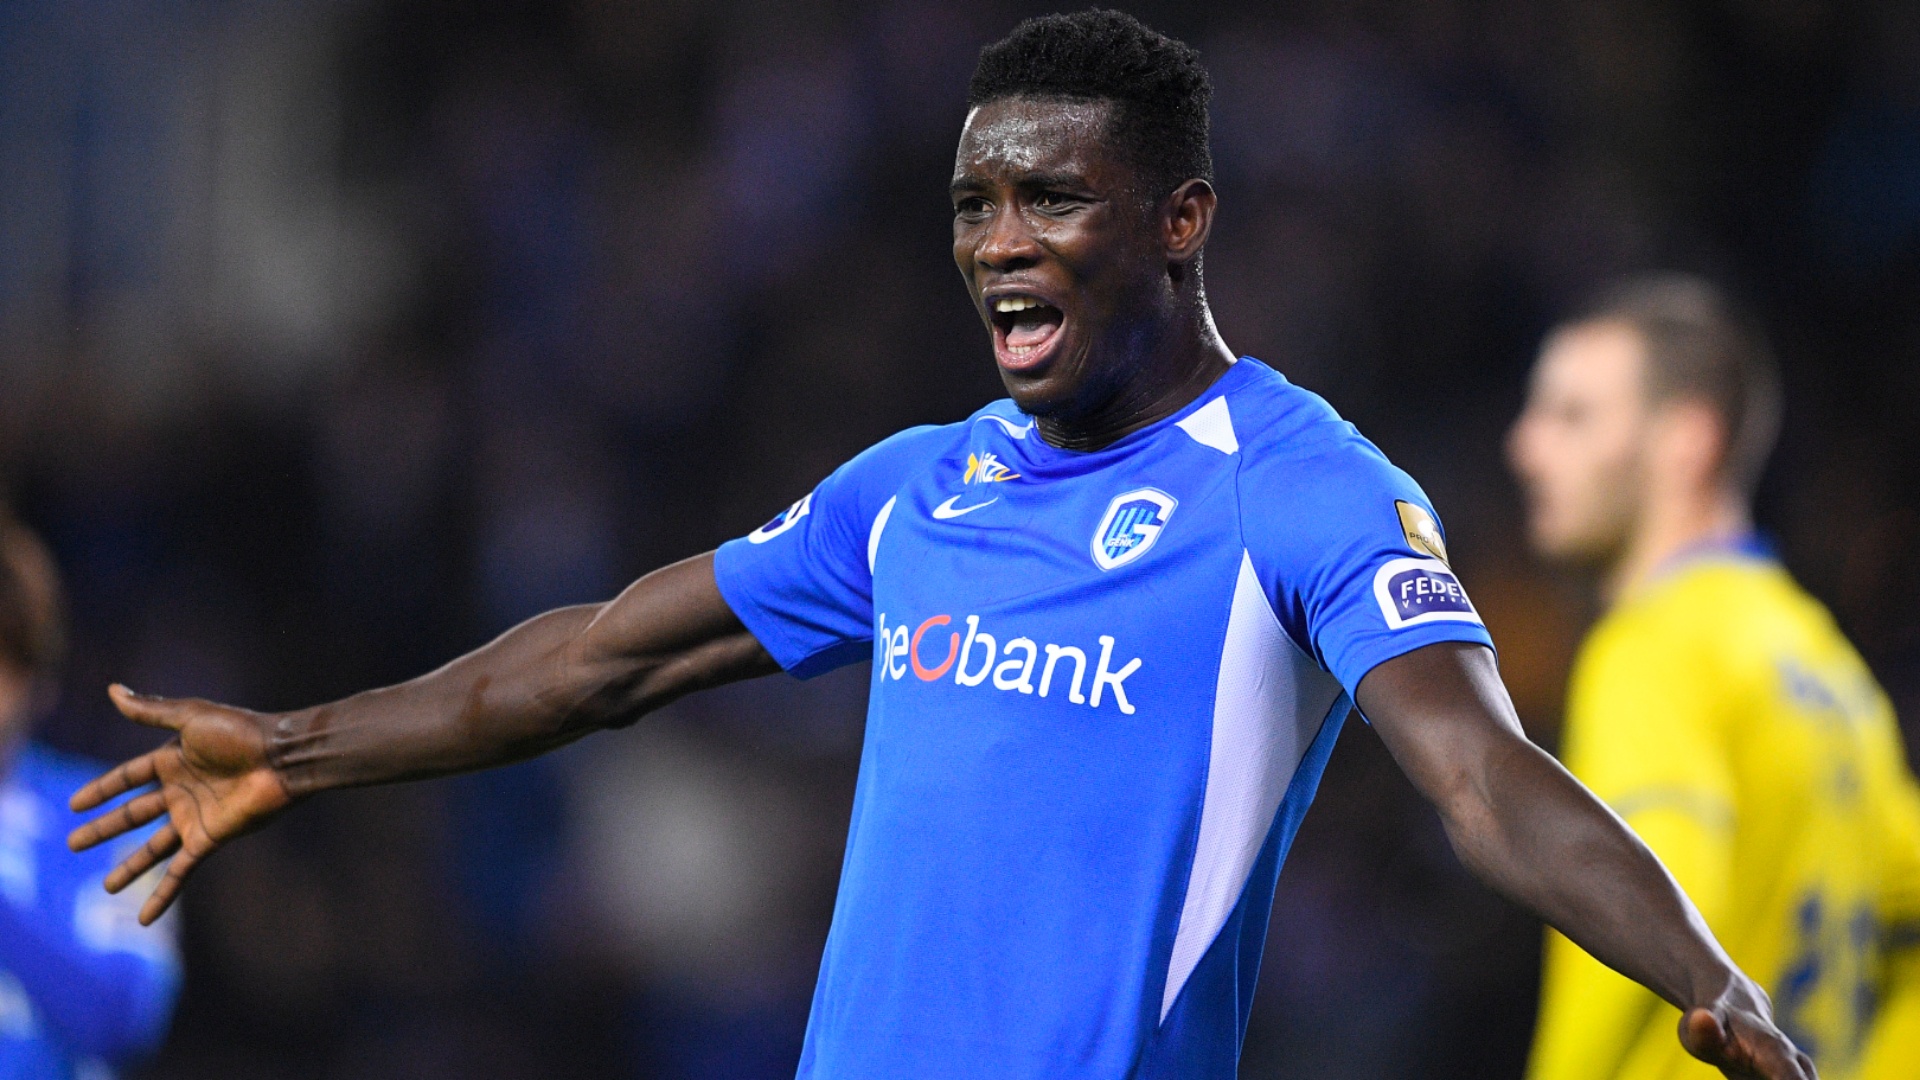 ‘I will always fight to represent Nigeria’ – Genk’s Onuachu reacts to latest Super Eagles snub